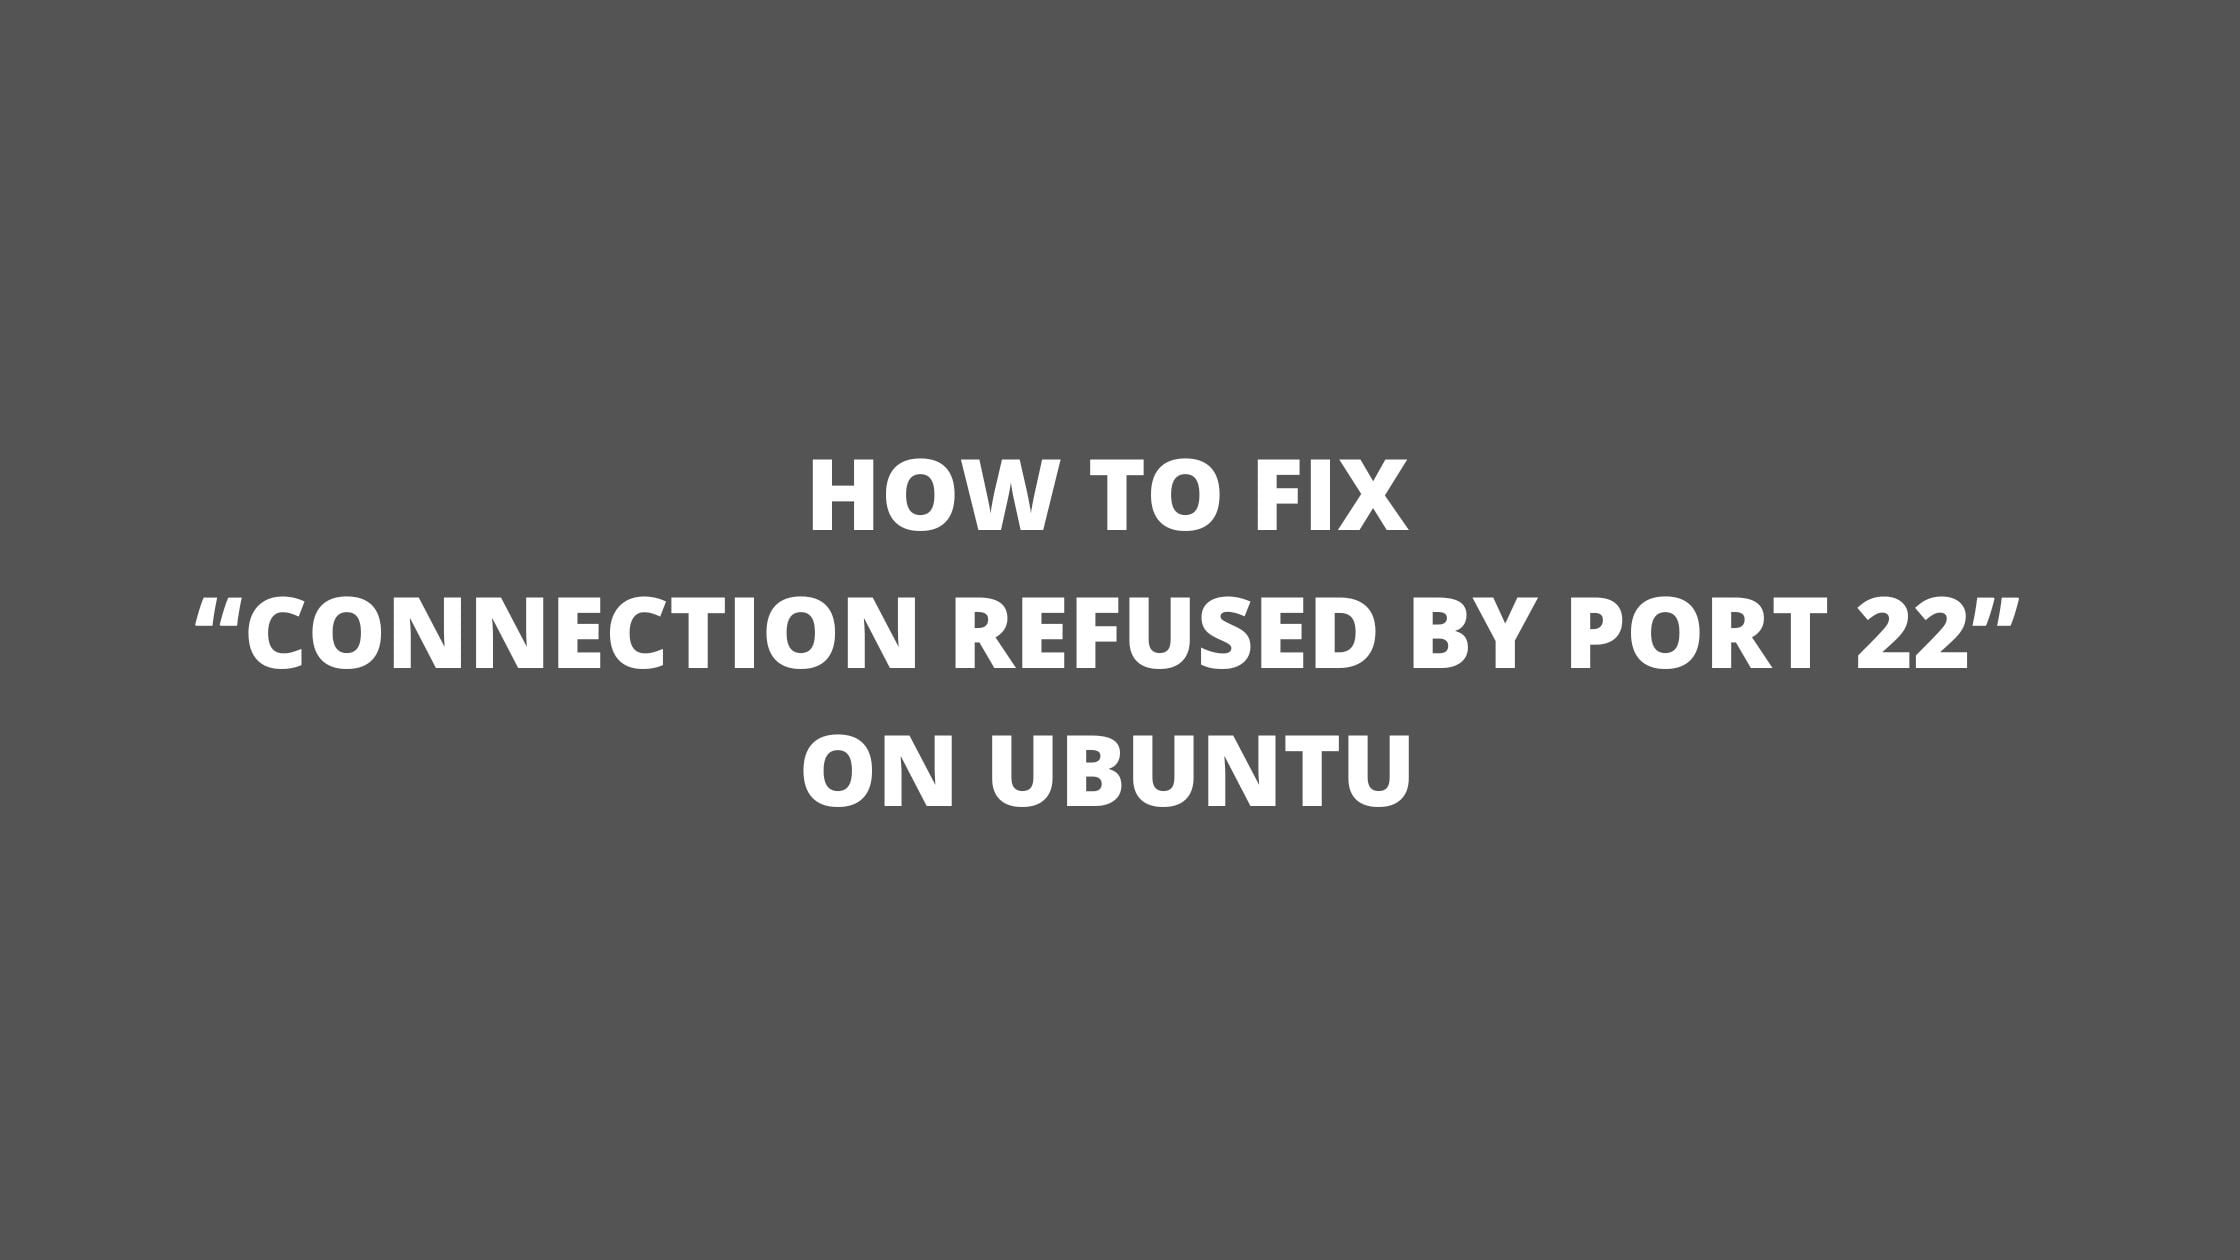 How to Fix “Connection refused by port 22” on Ubuntu